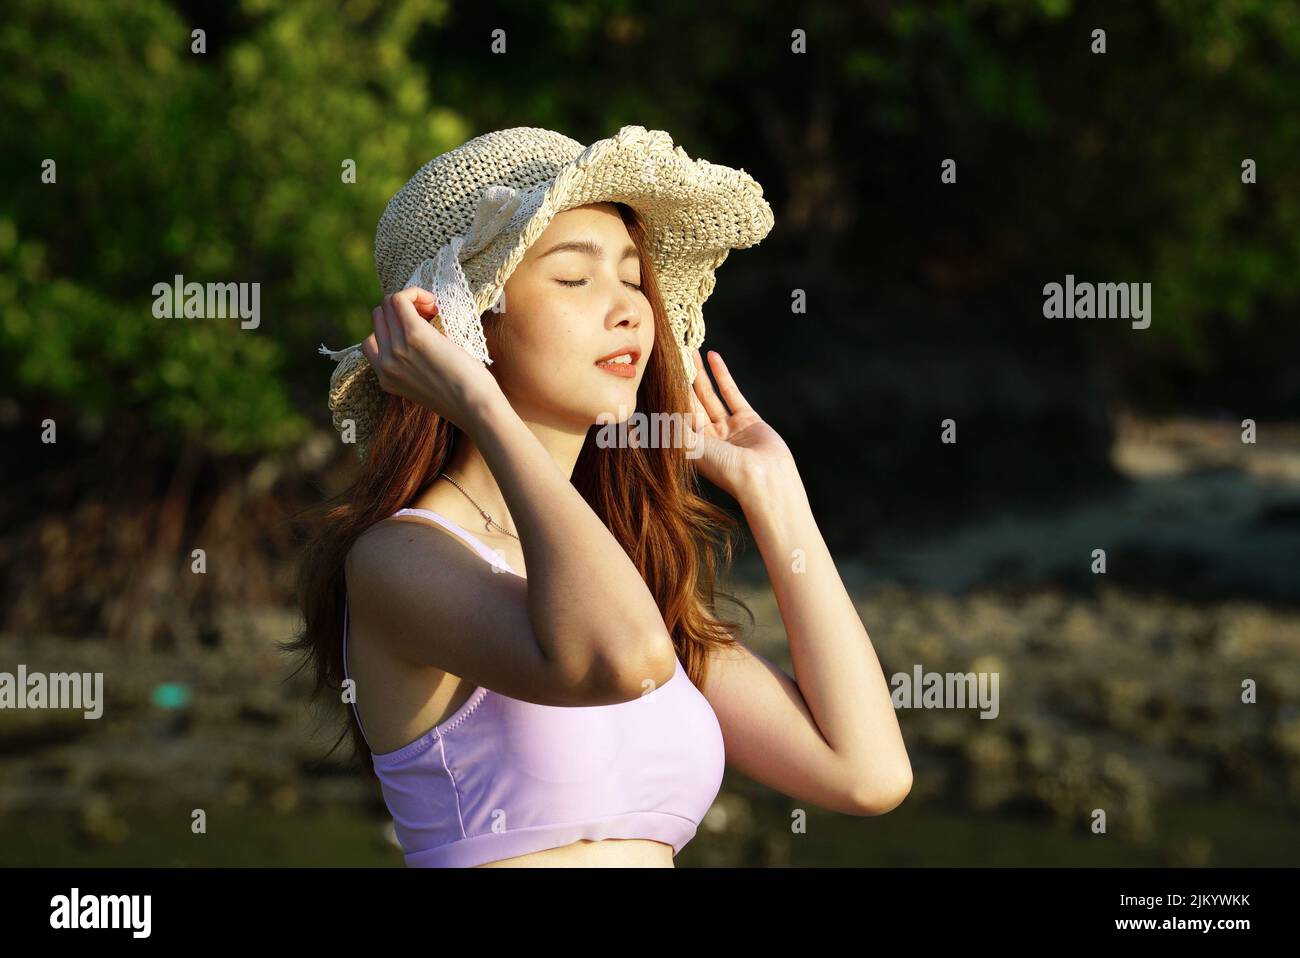 A pretty South Asian female with a hat against the trees under sunlight Stock Photo